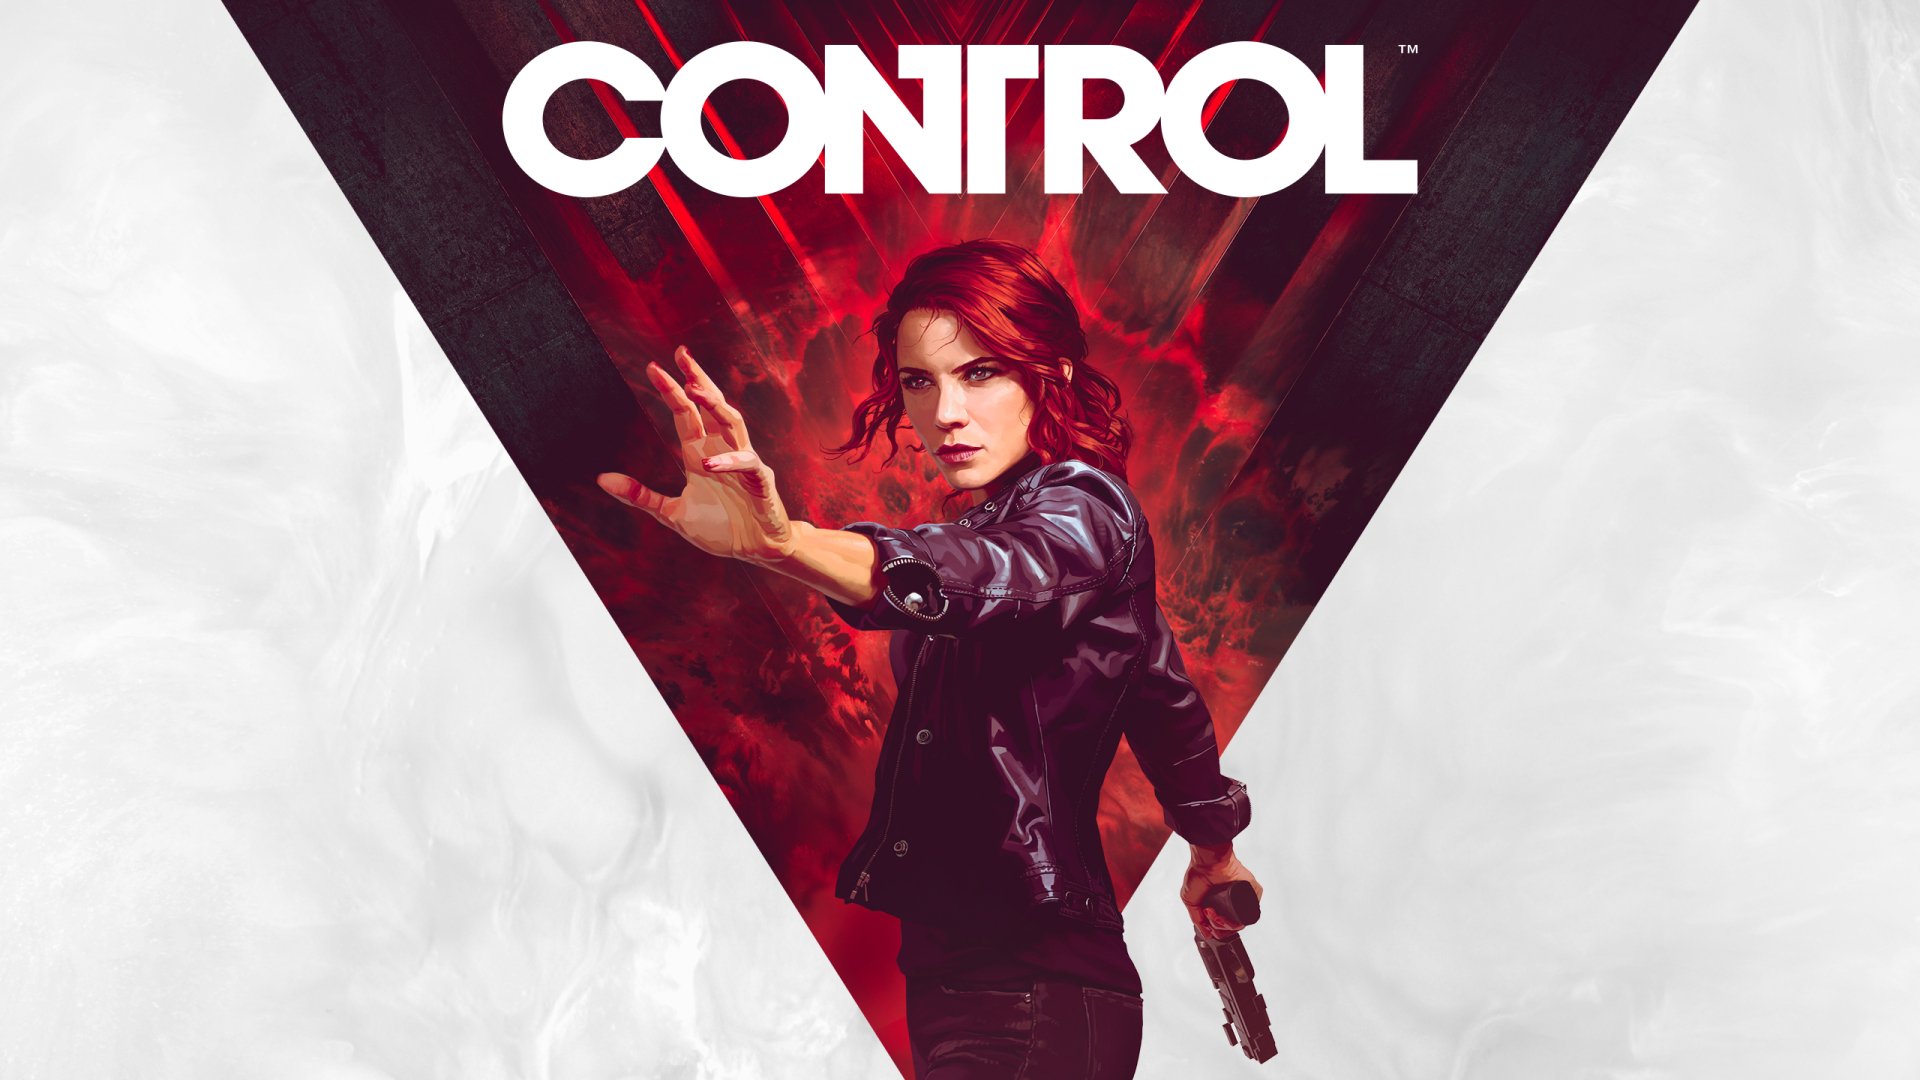 An image displaying the main protagonist of Control